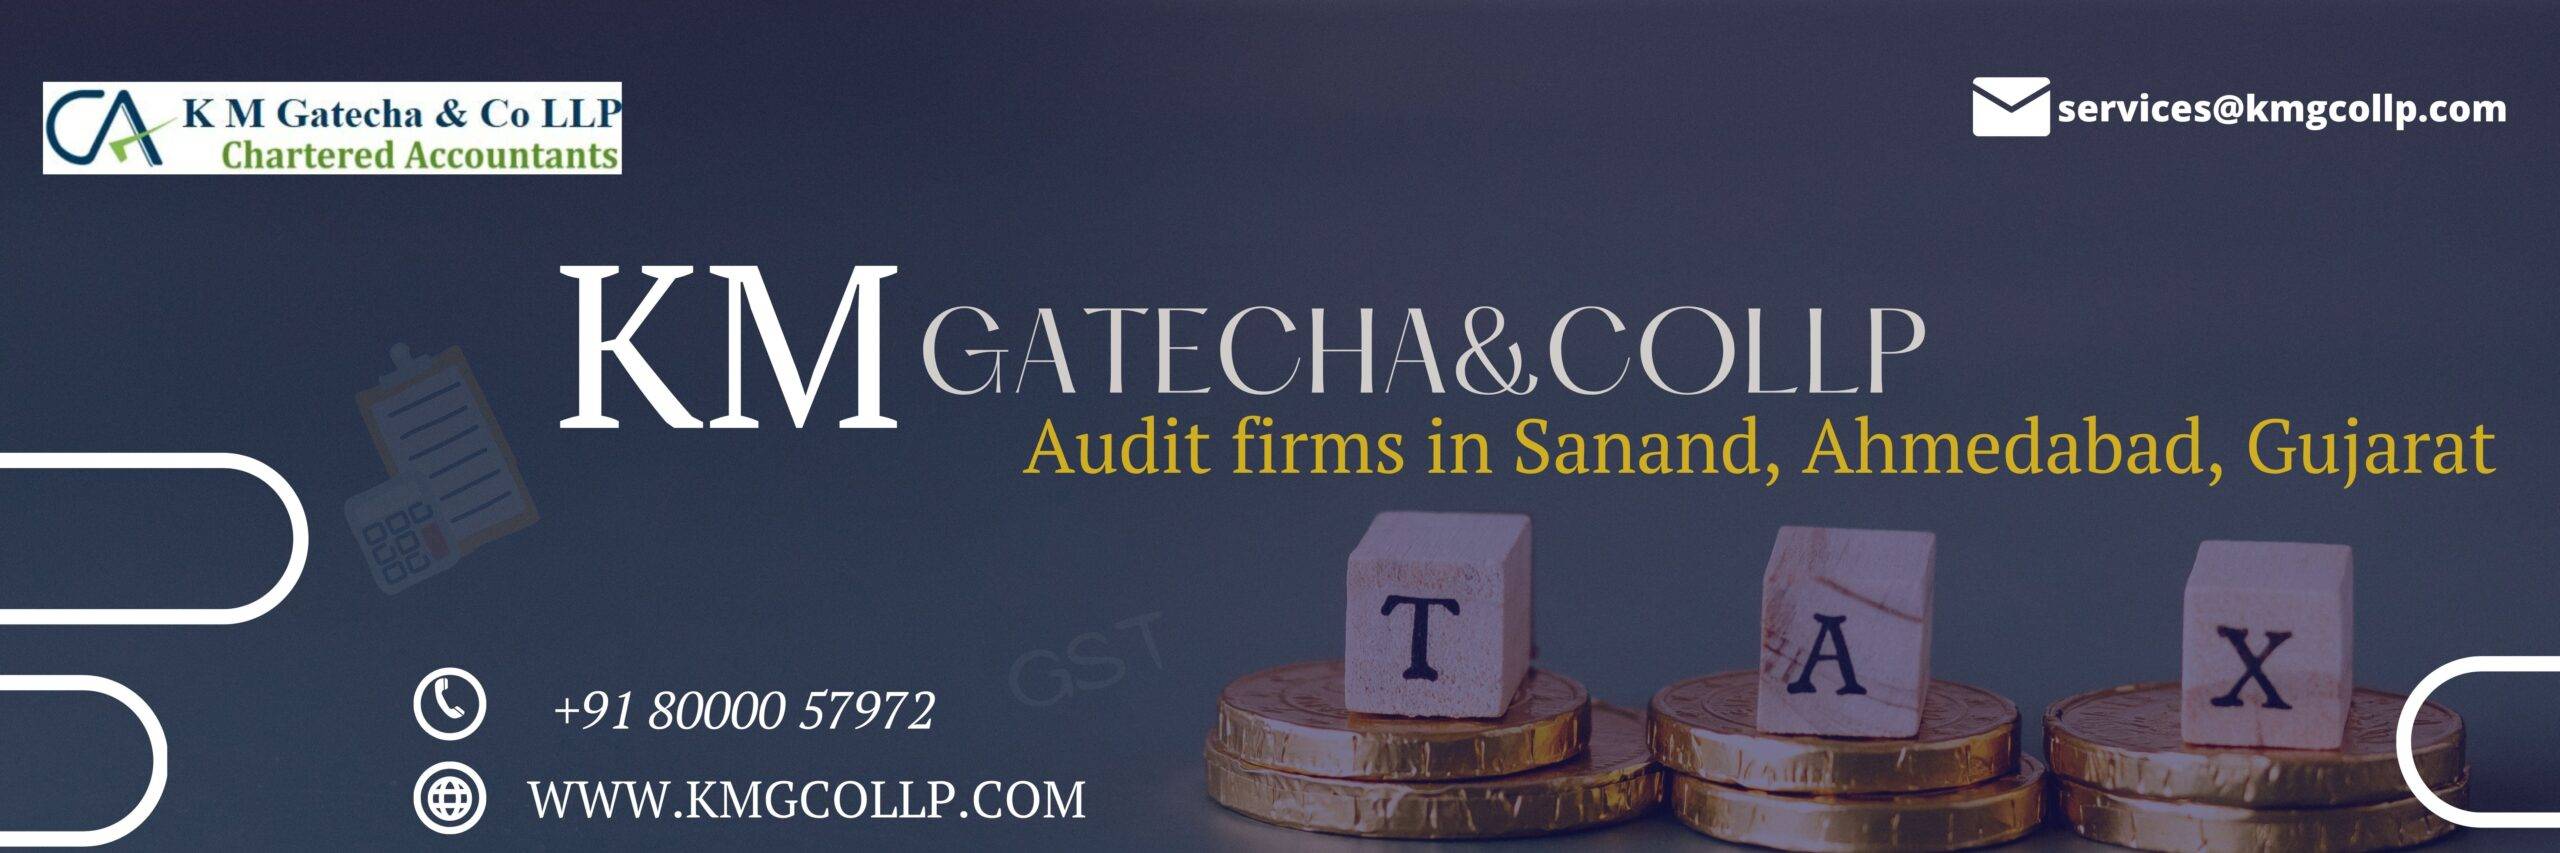 audit firms in Sanand, Ahmedabad, Gujarat